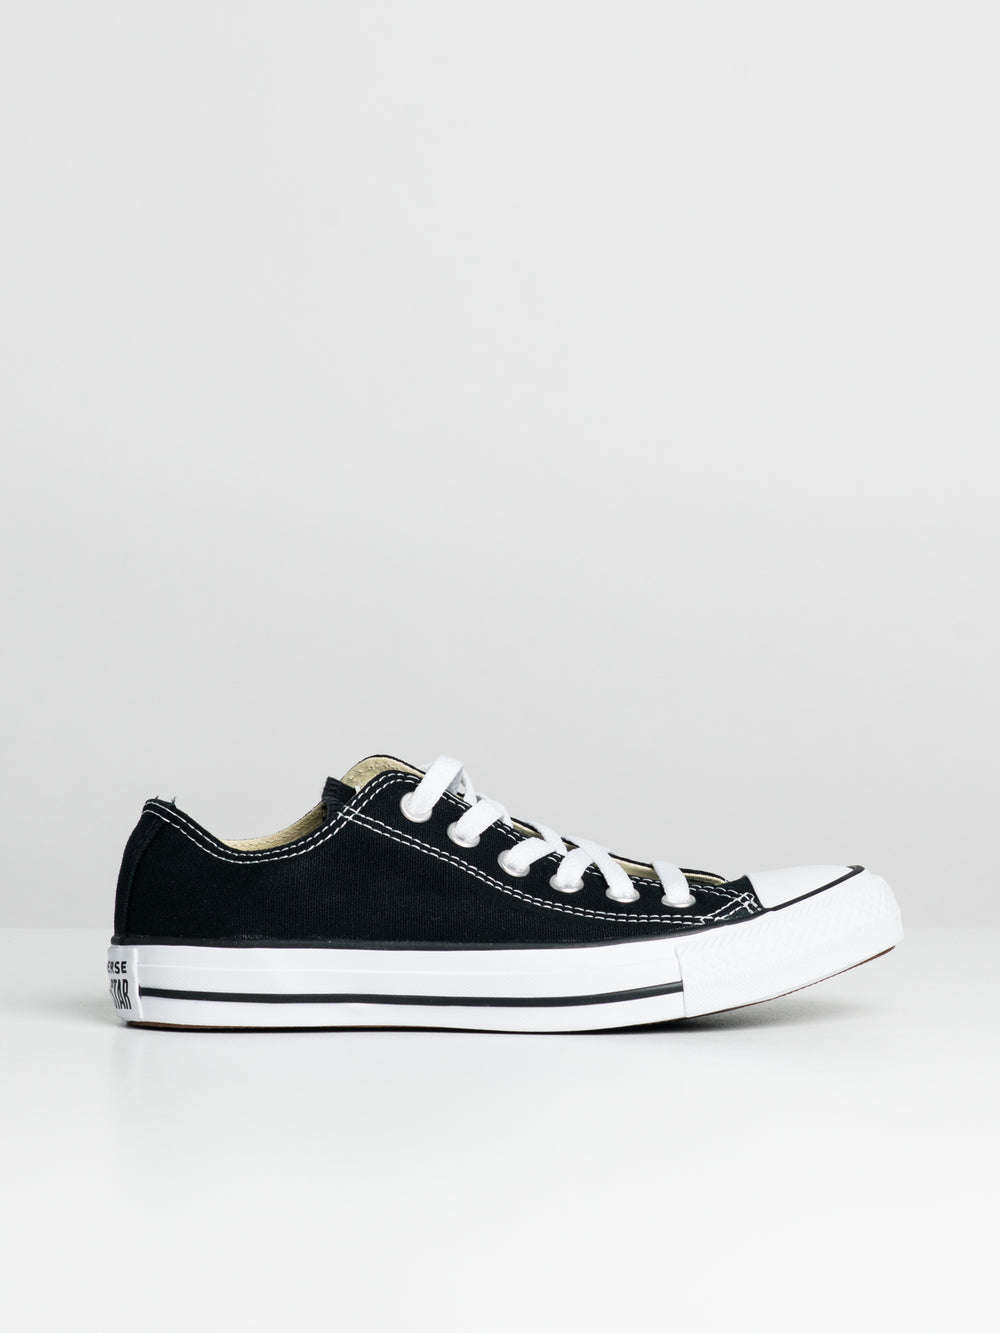 Converse Chuck Taylor All Star Leather sneaker - Californian